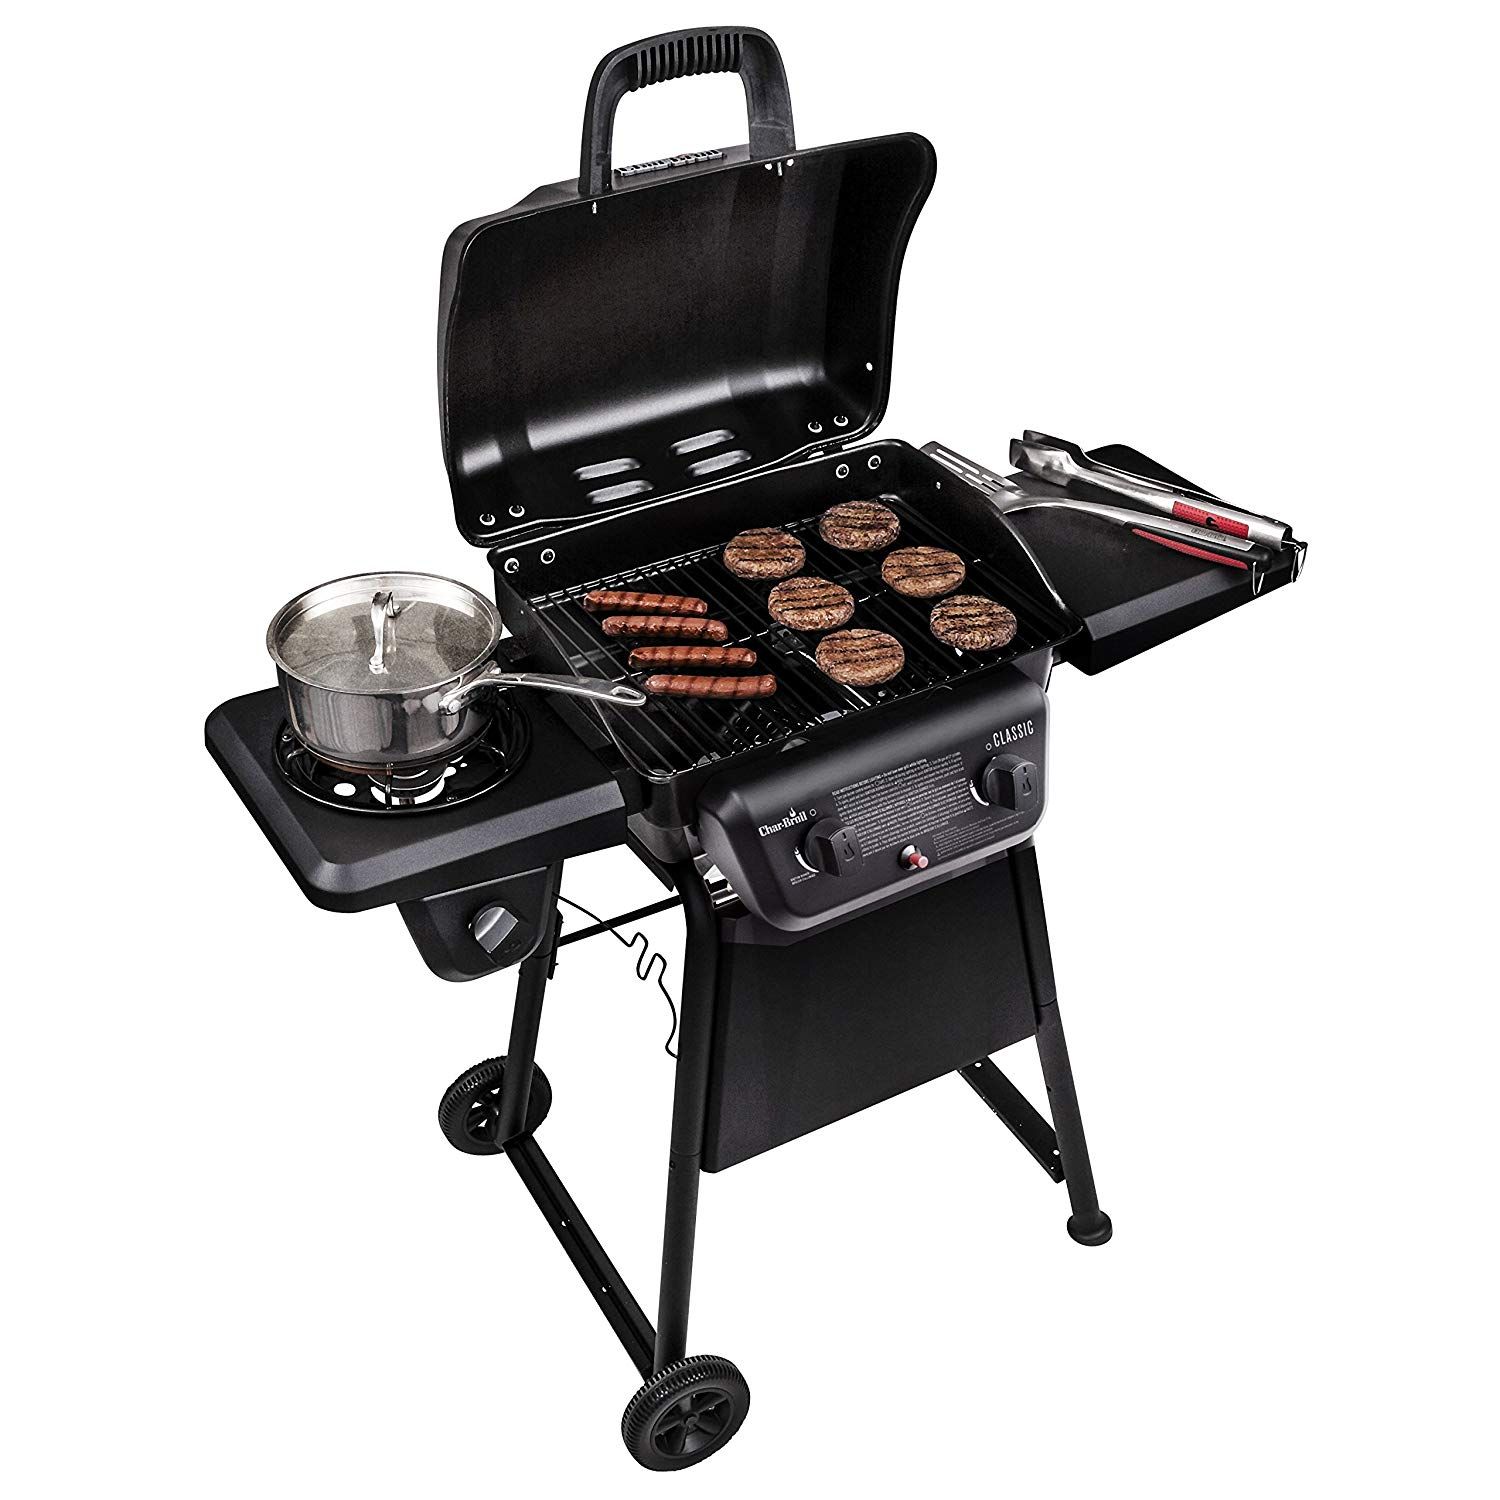 Electric Table Top BBQ Grill - Buy Electric, Charcoal and Propane Grills At Best Prices